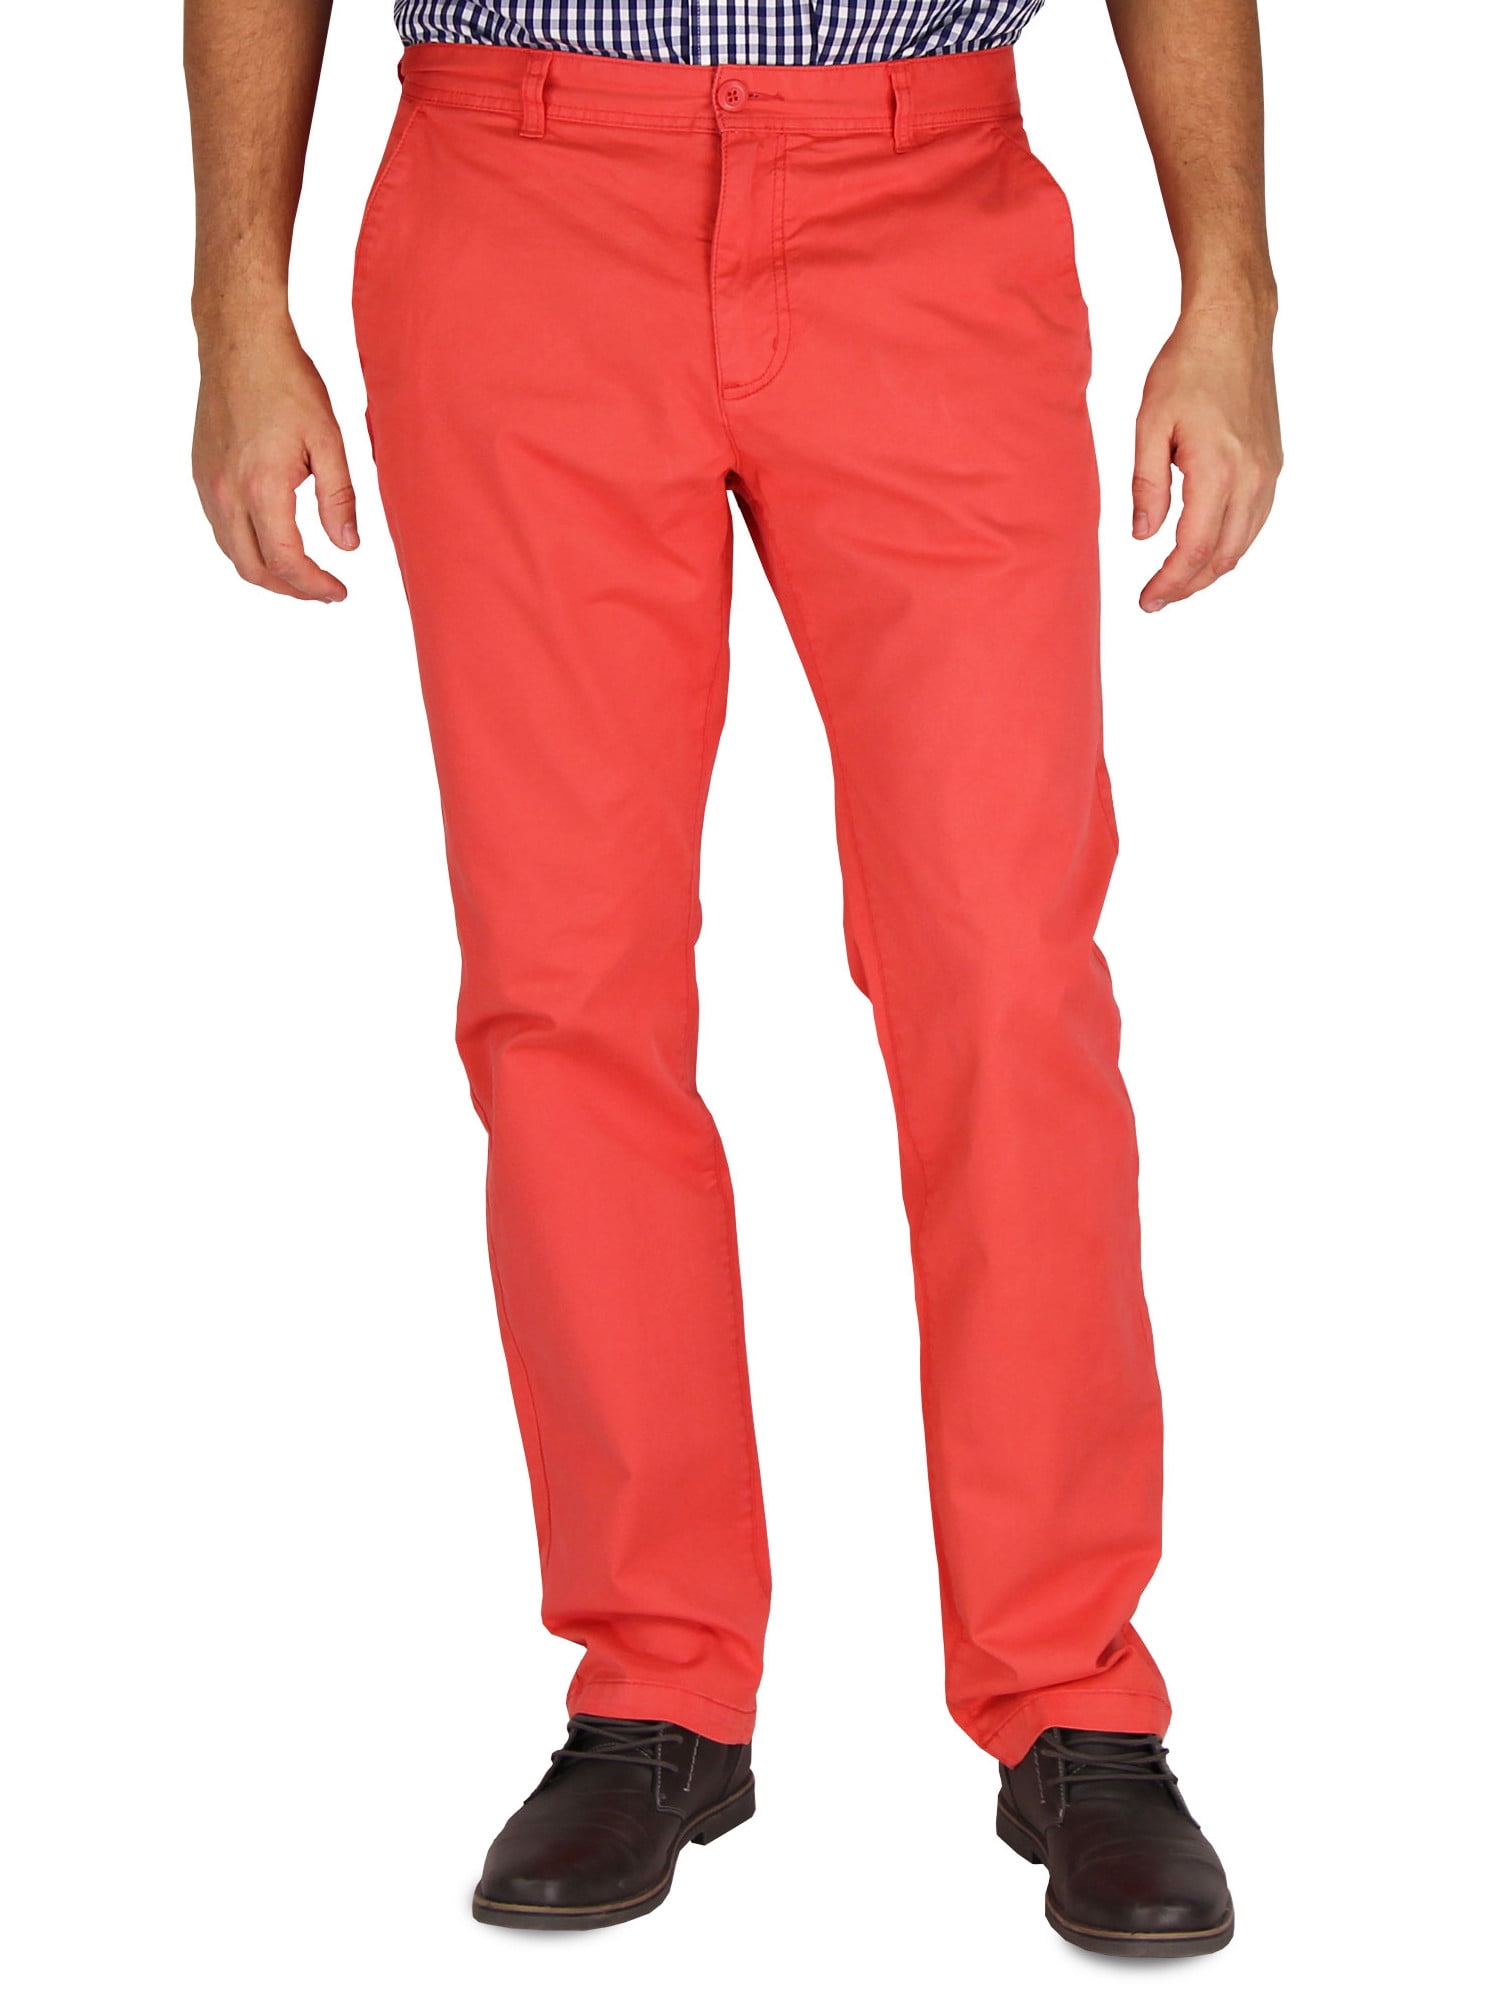 What is a men's 34″ pant size equivalent to a woman's size pants? - Quora